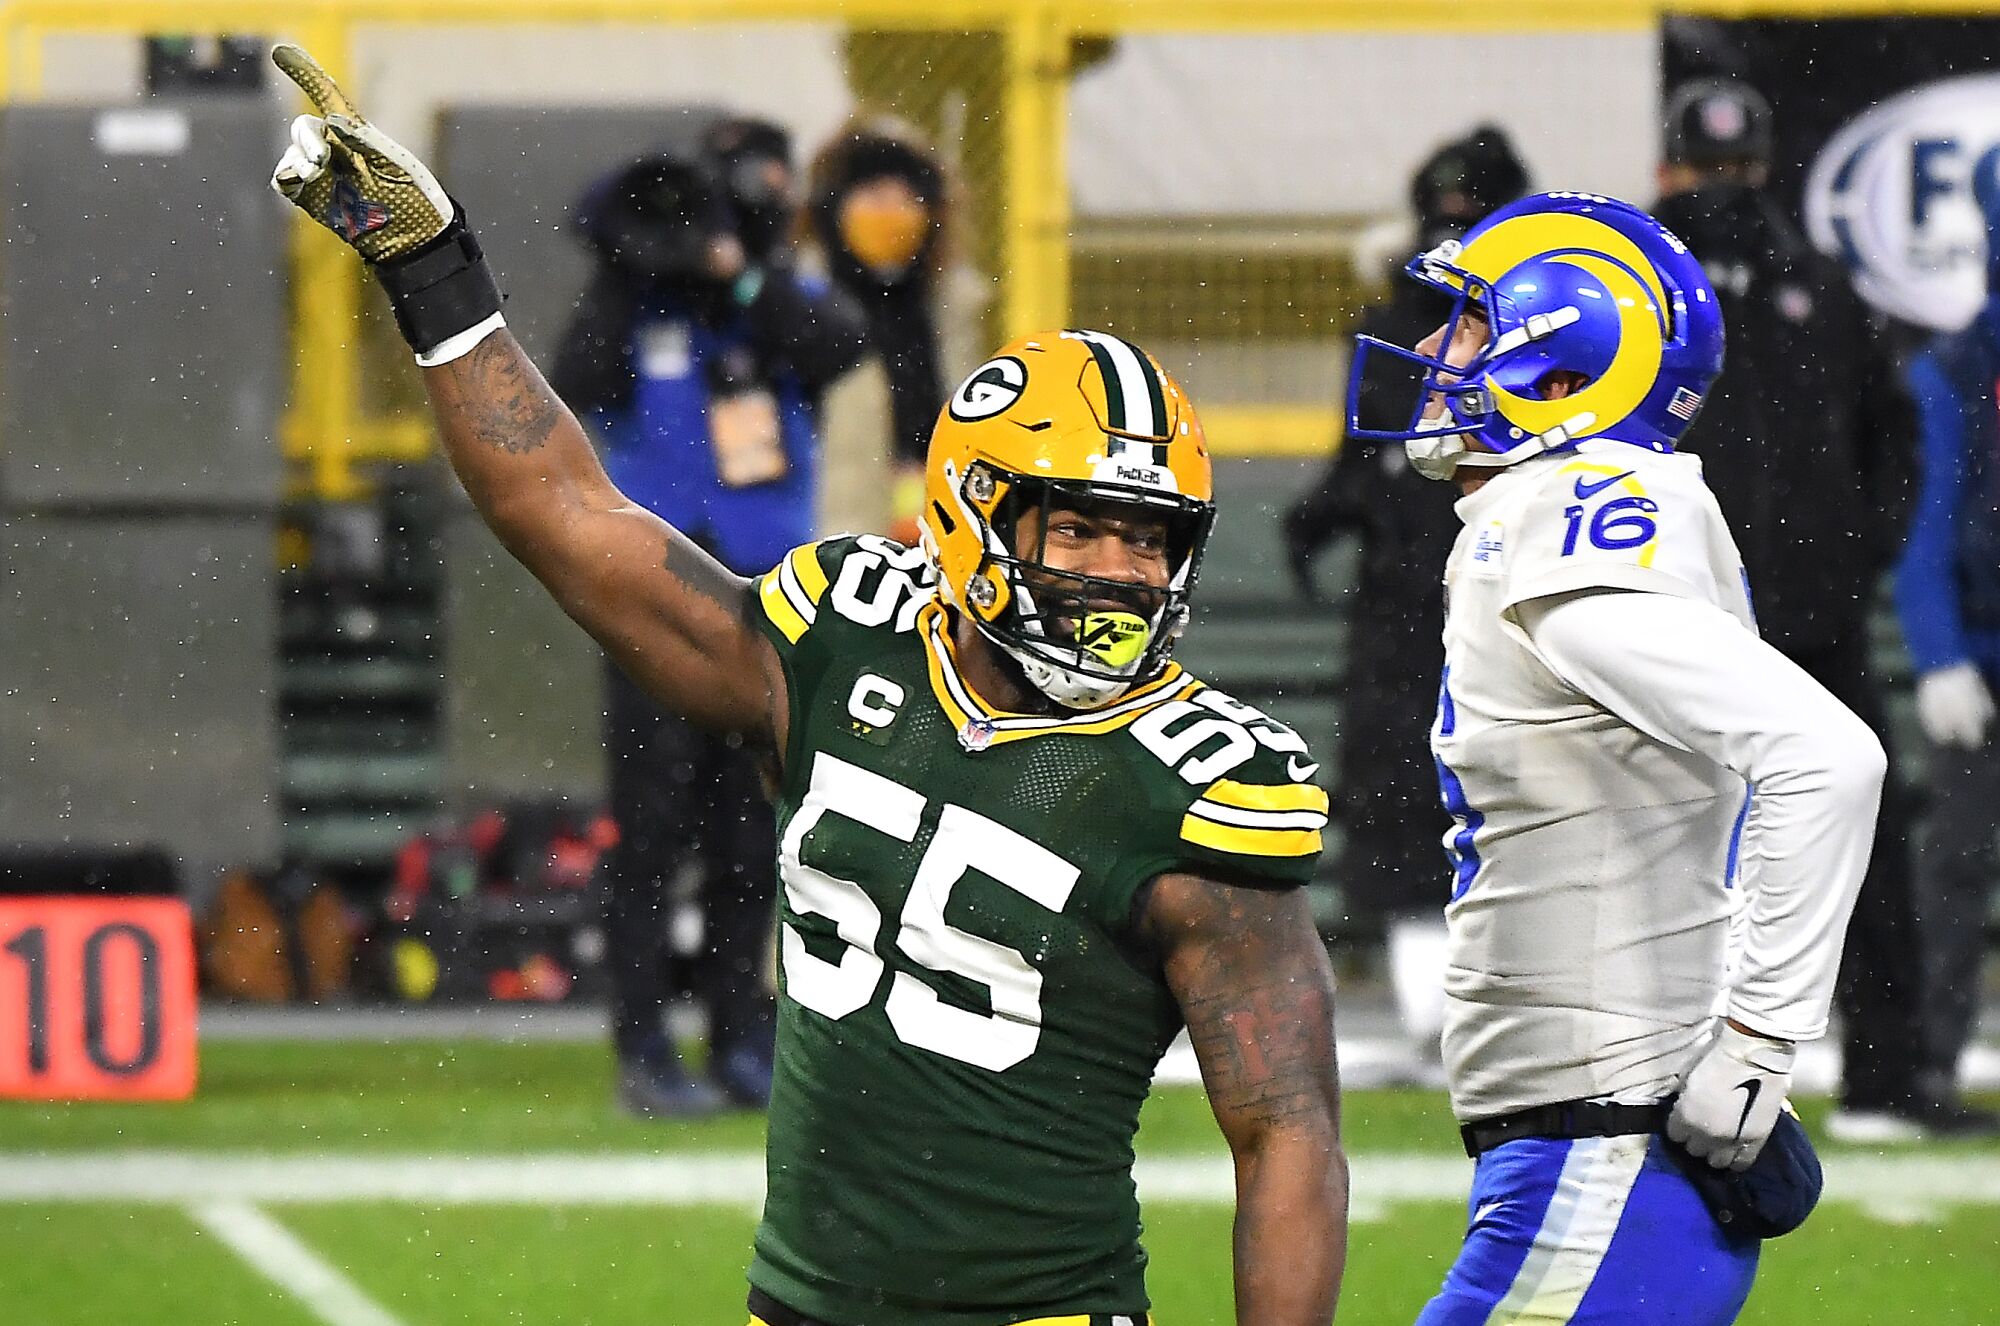 Green Bay Packers linebacker Za'Darius Smith celebrates after sacking Rams quarterback Jared Goff in the second quarter.